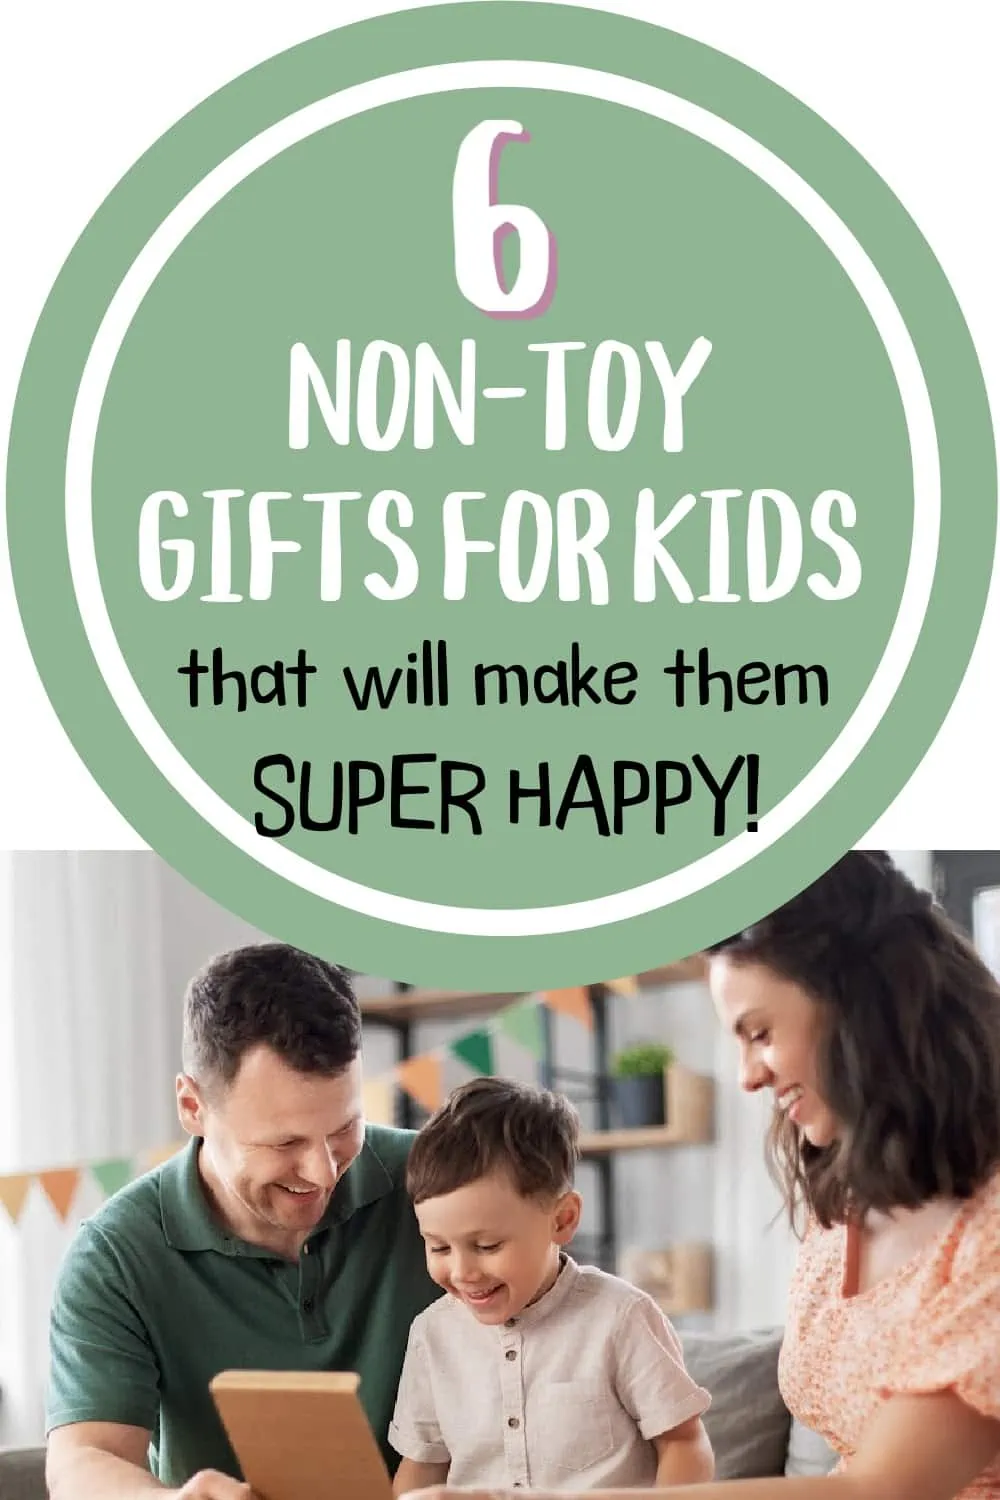 6 non-toy gift ideas for kids that will make them super happy.